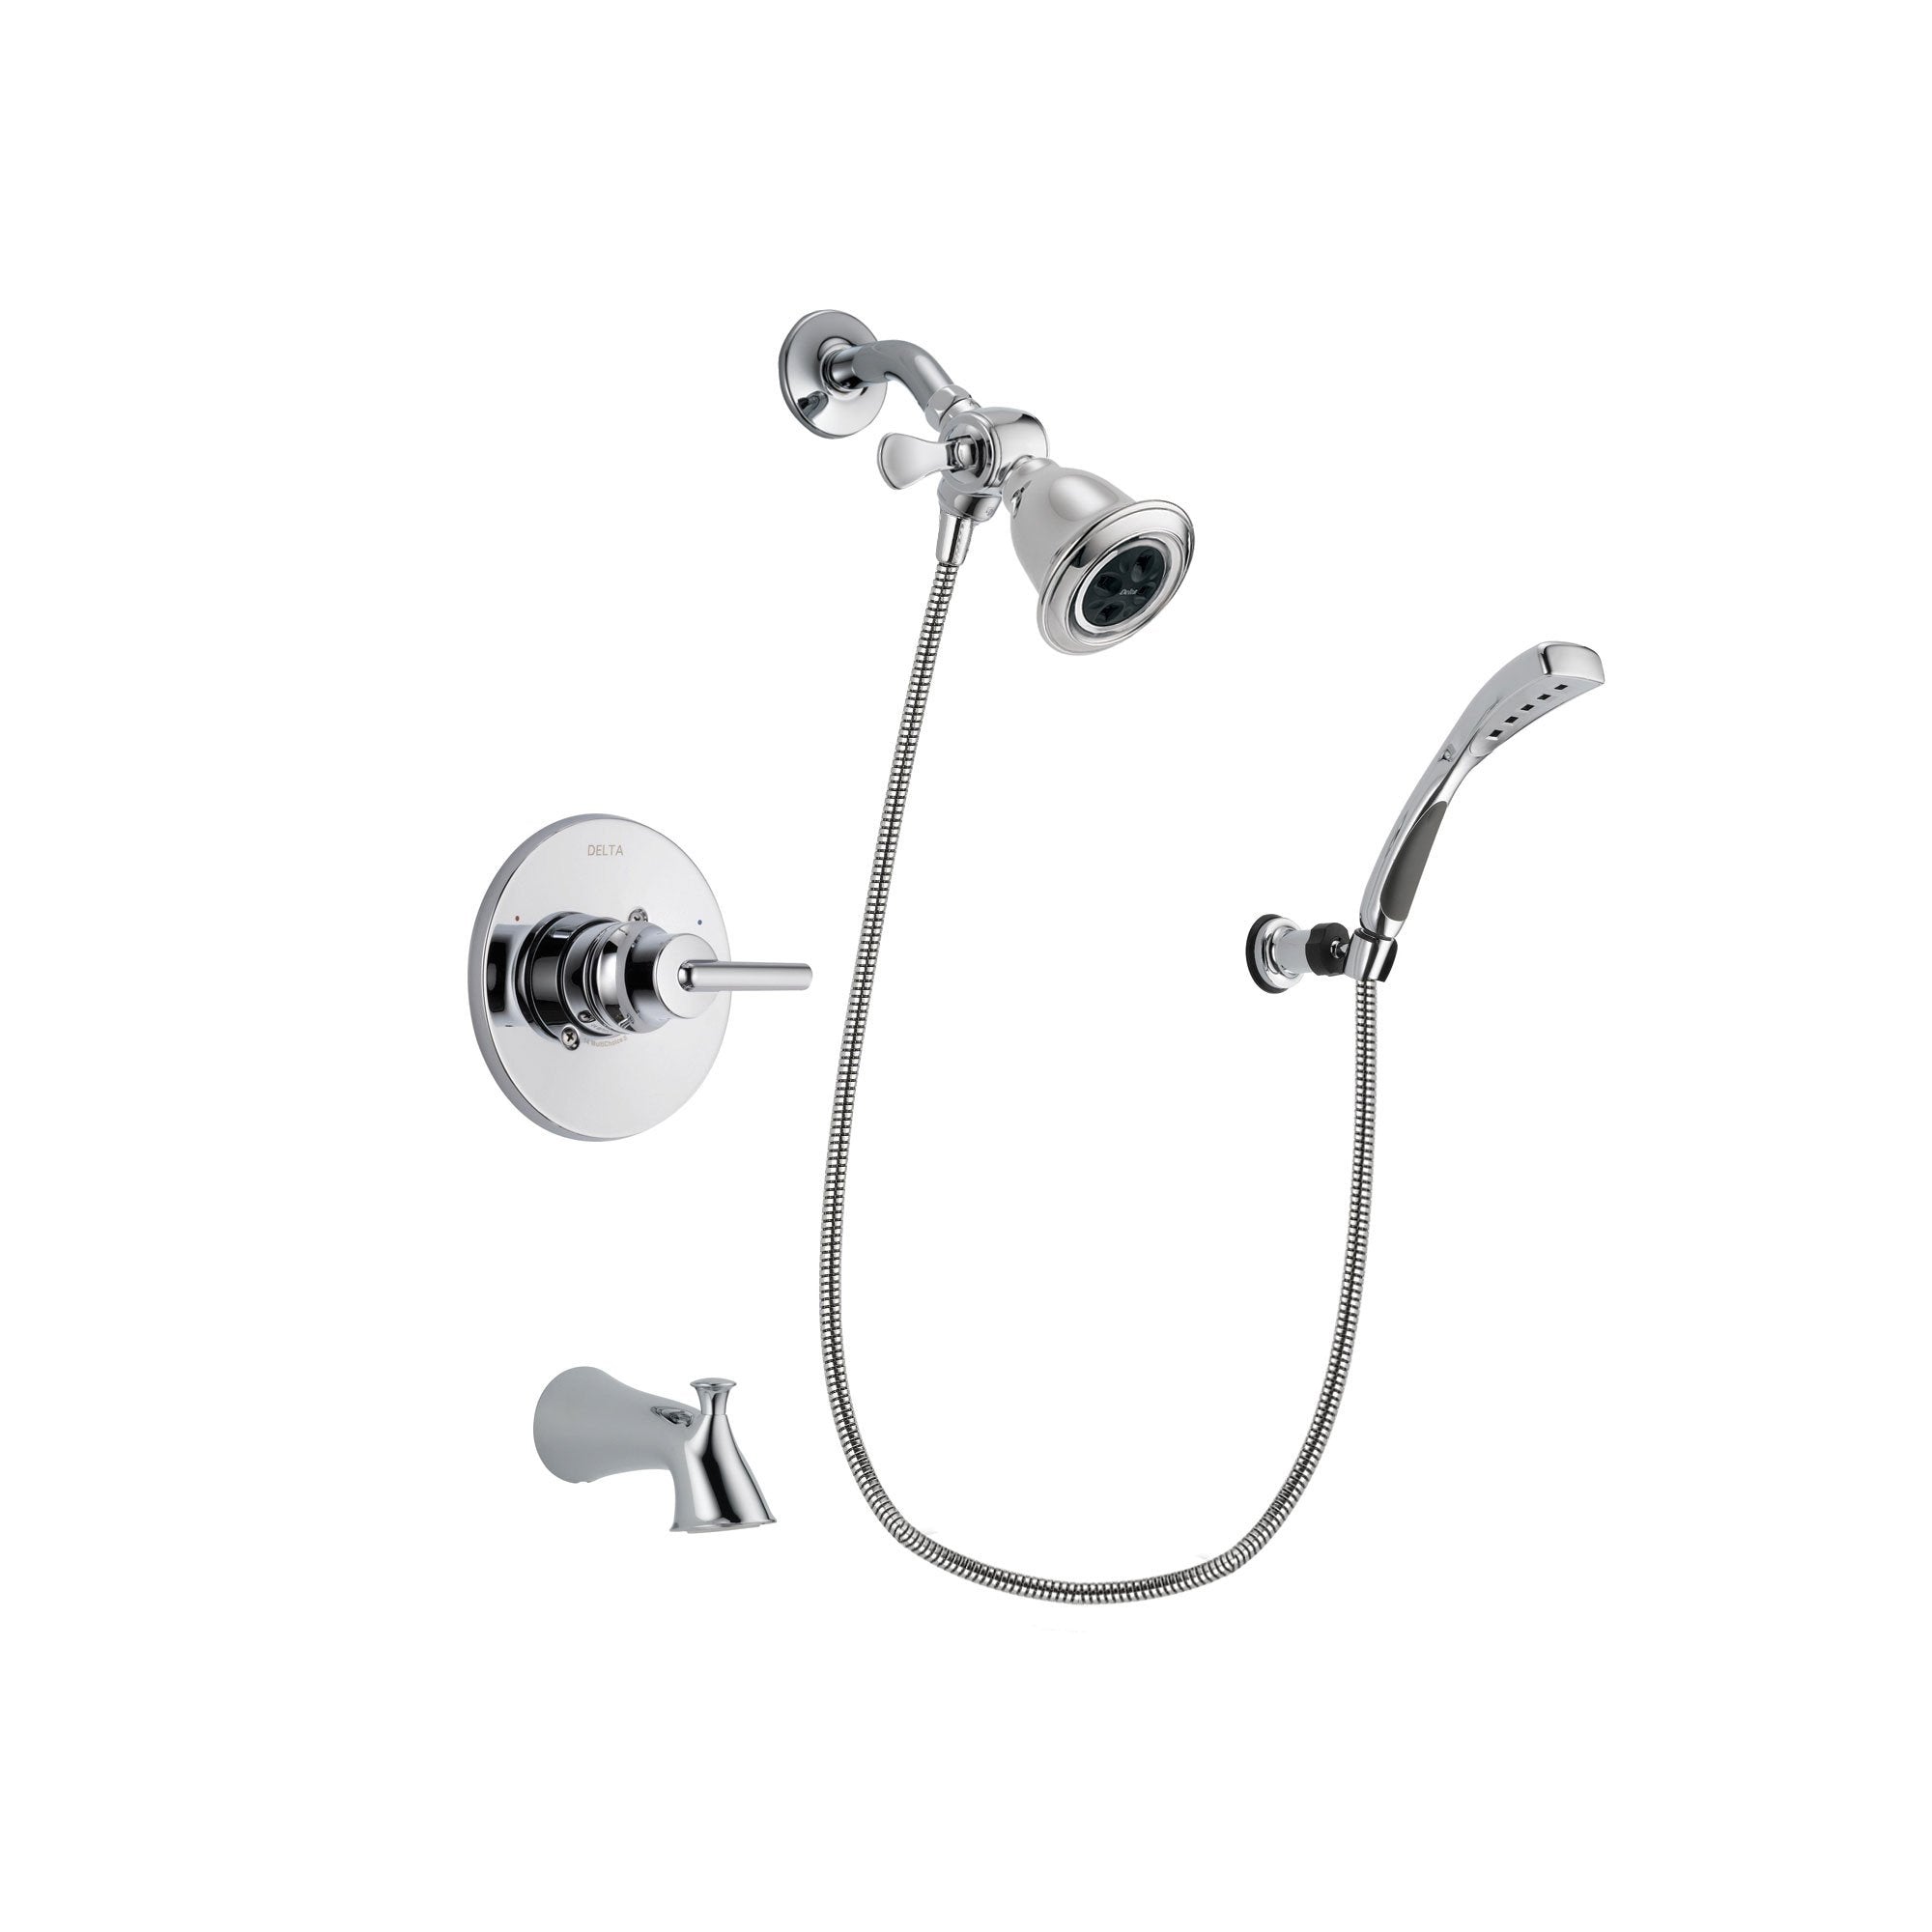 Delta Trinsic Chrome Finish Tub and Shower Faucet System Package with Water Efficient Showerhead and Wall-Mount Bracket with Handheld Shower Spray Includes Rough-in Valve and Tub Spout DSP1015V